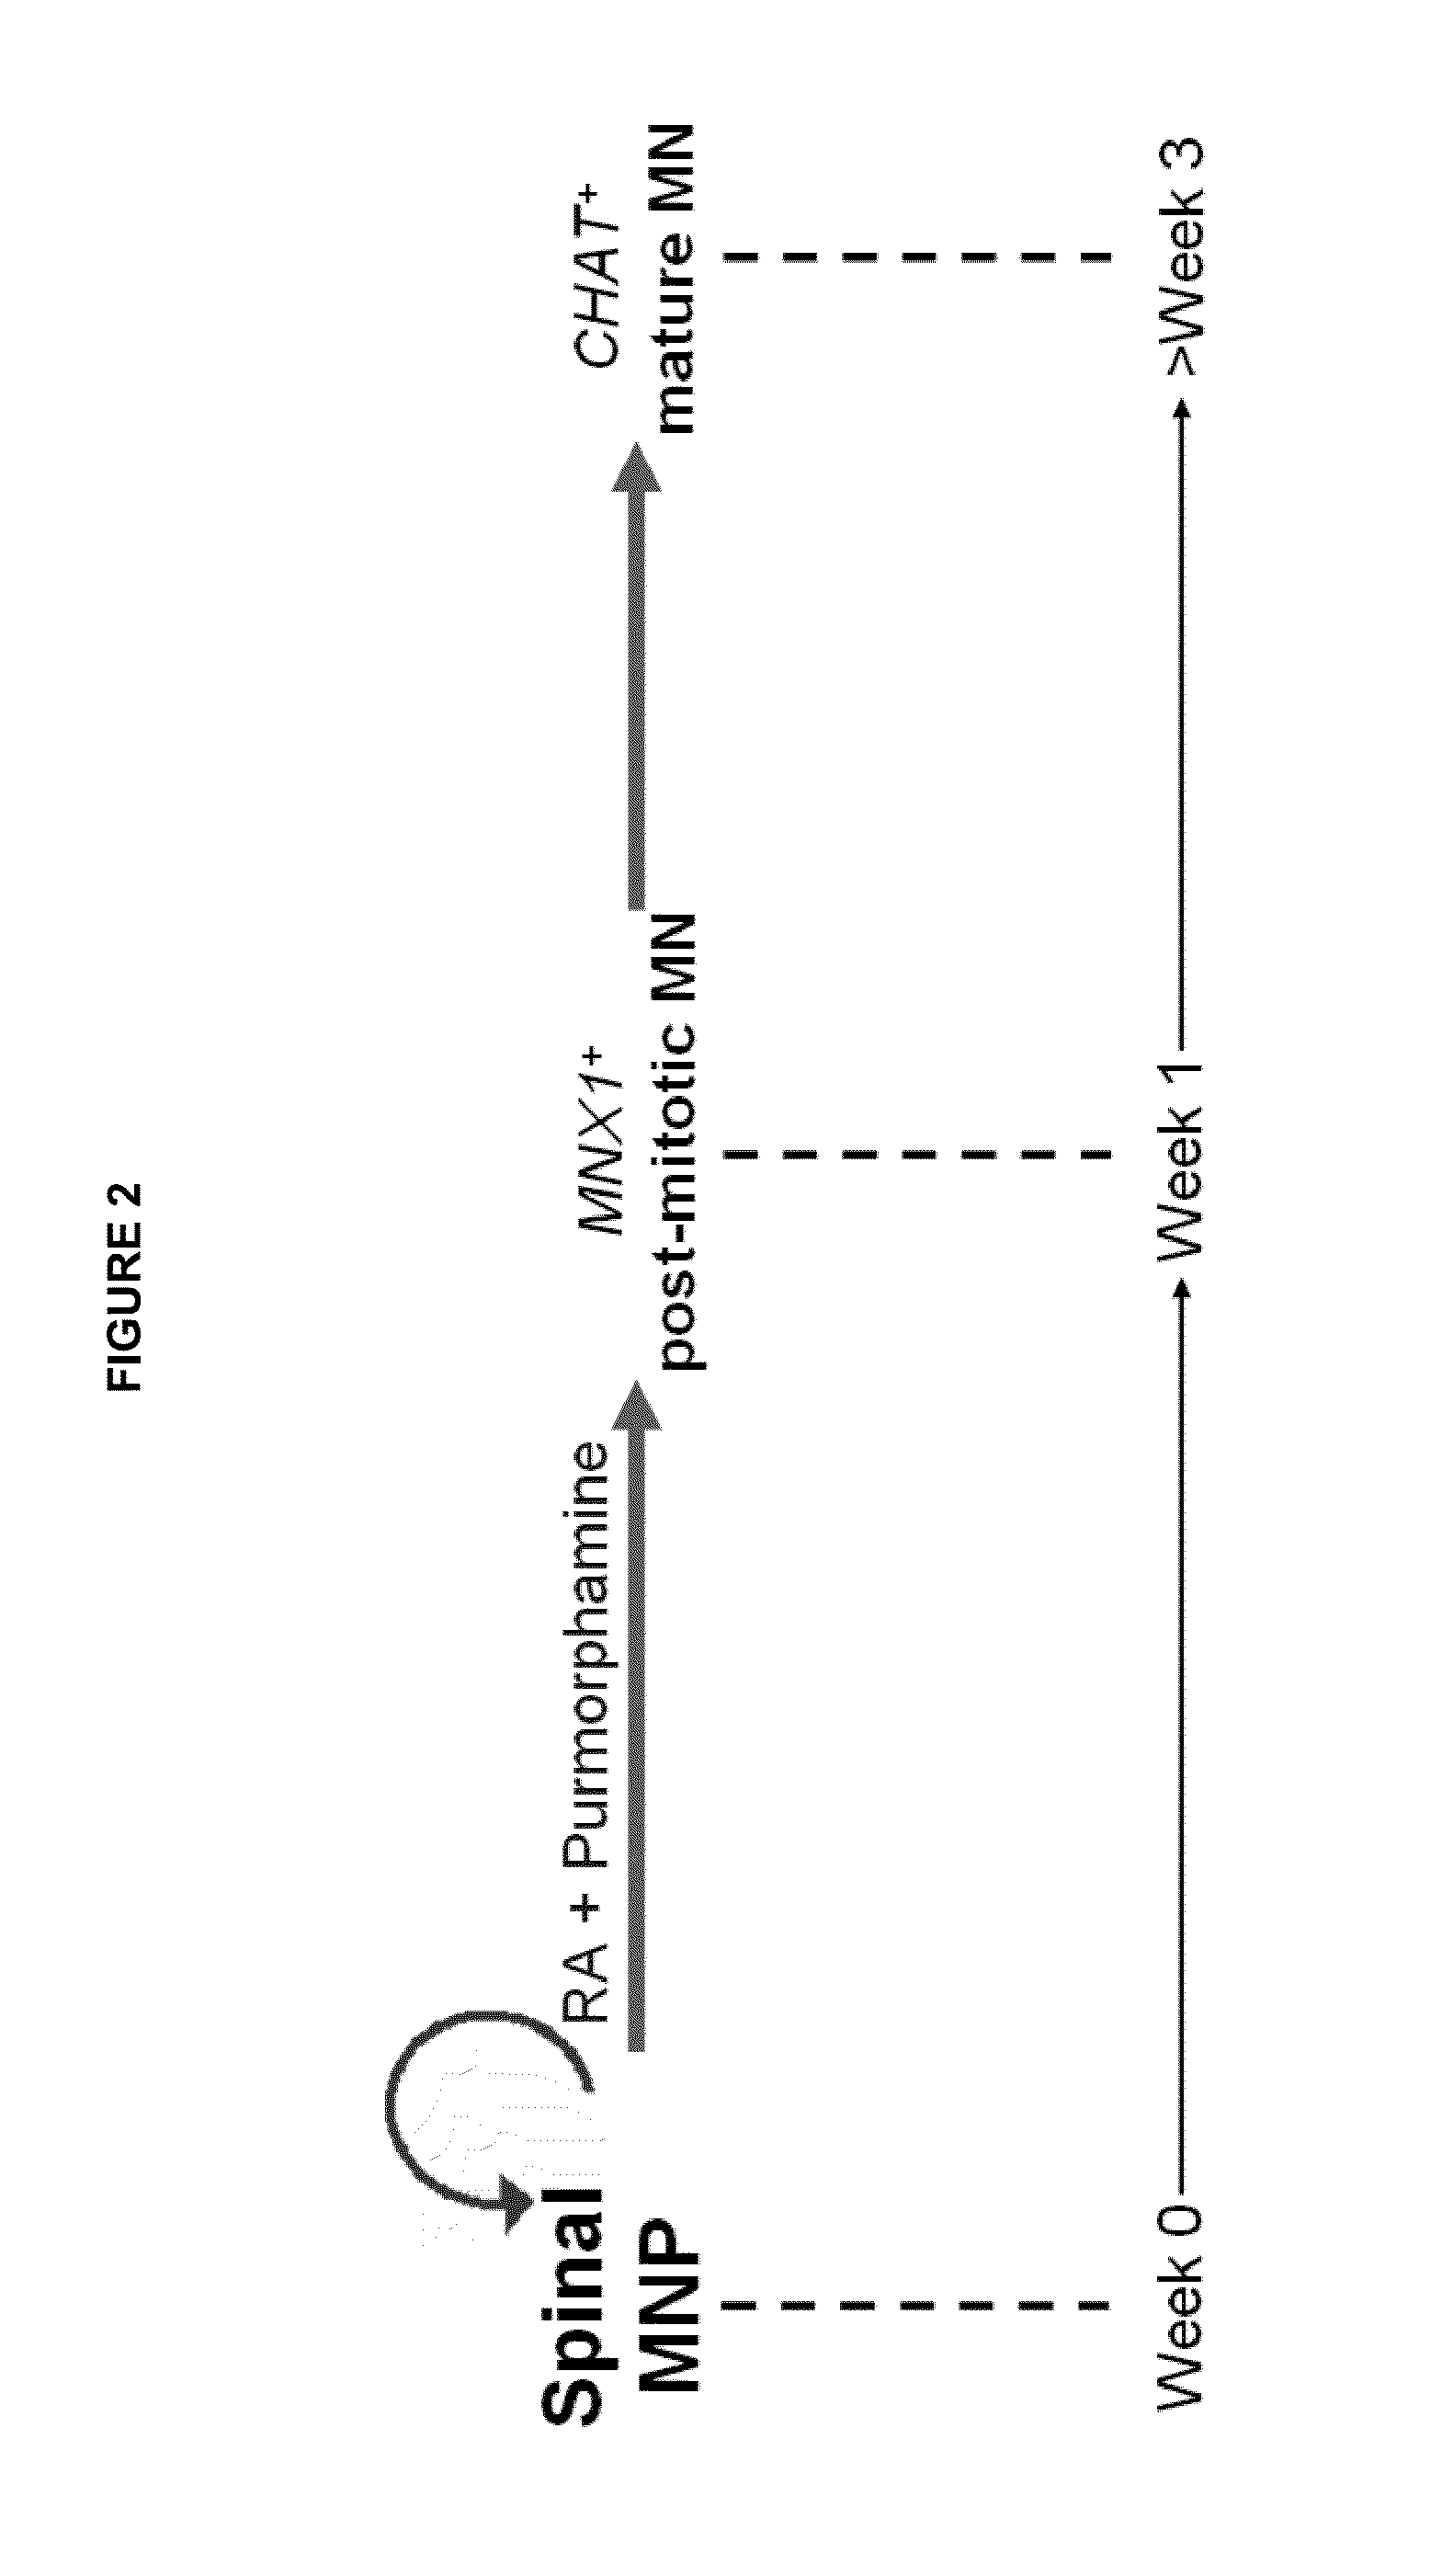 Methods of maintaining, expanding, and diffrentiating neuronal subtype specific progenitors